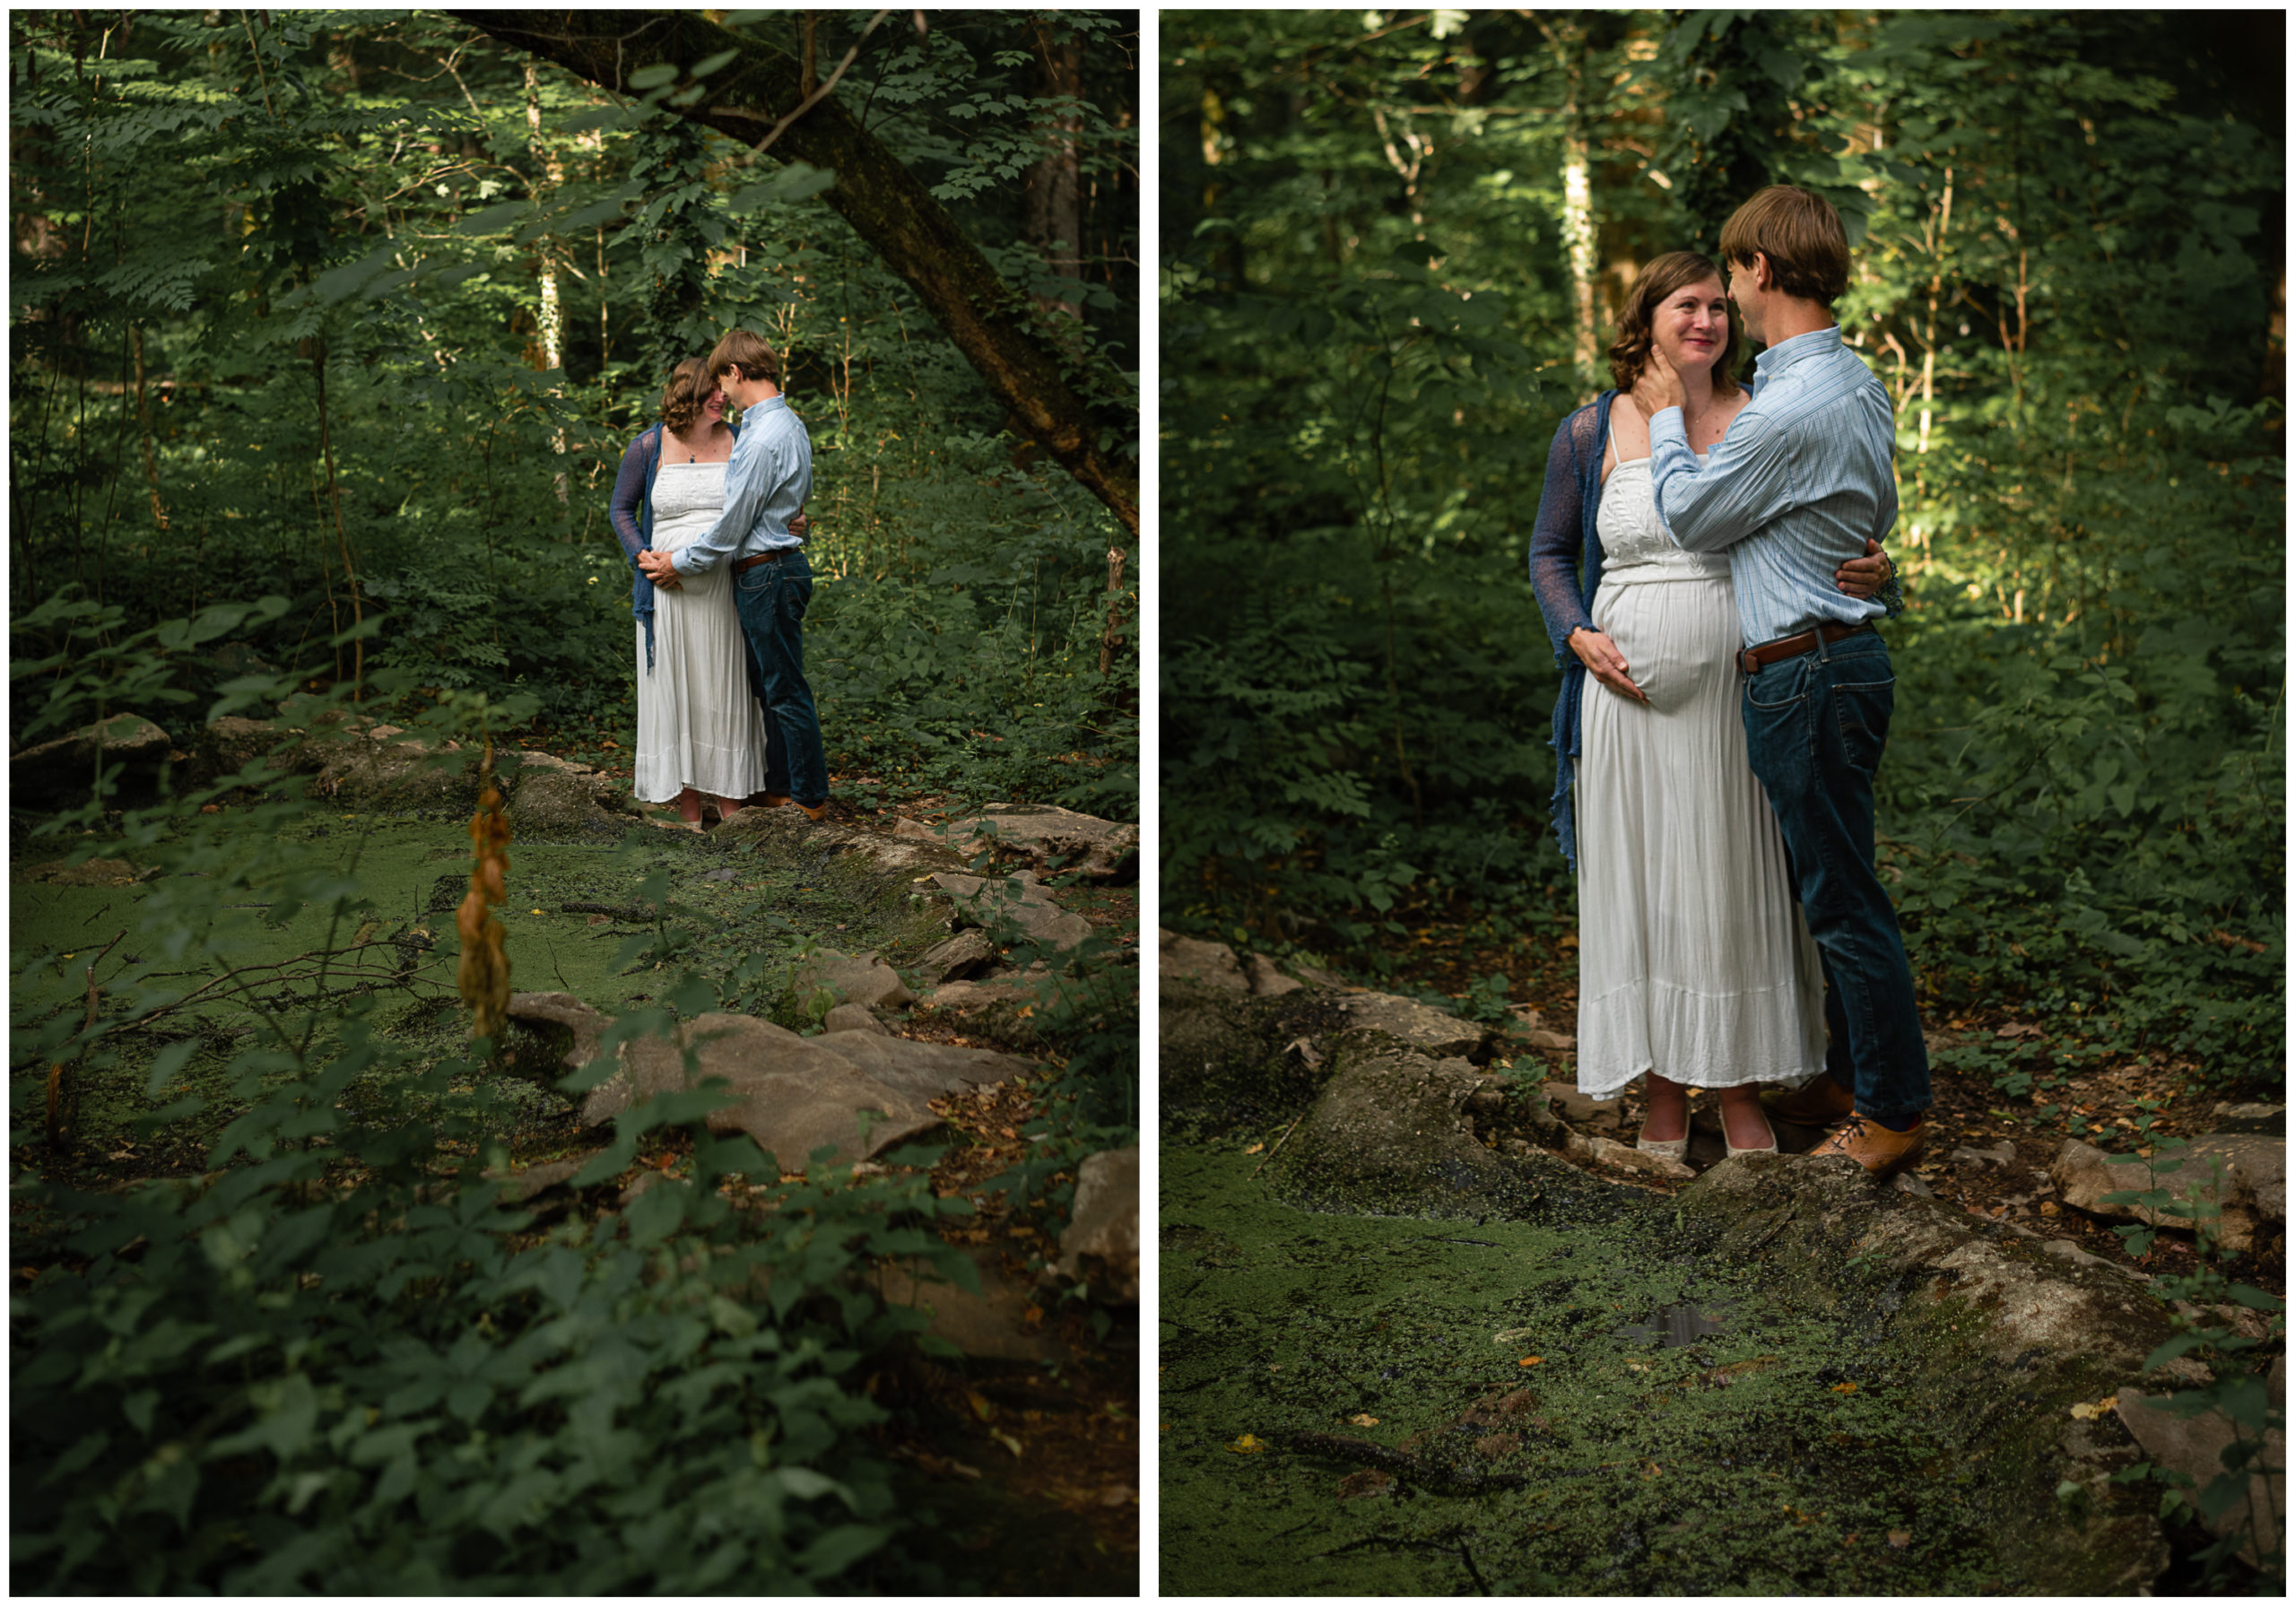 Collage of a couple posing for maternity photos in a lush forest.